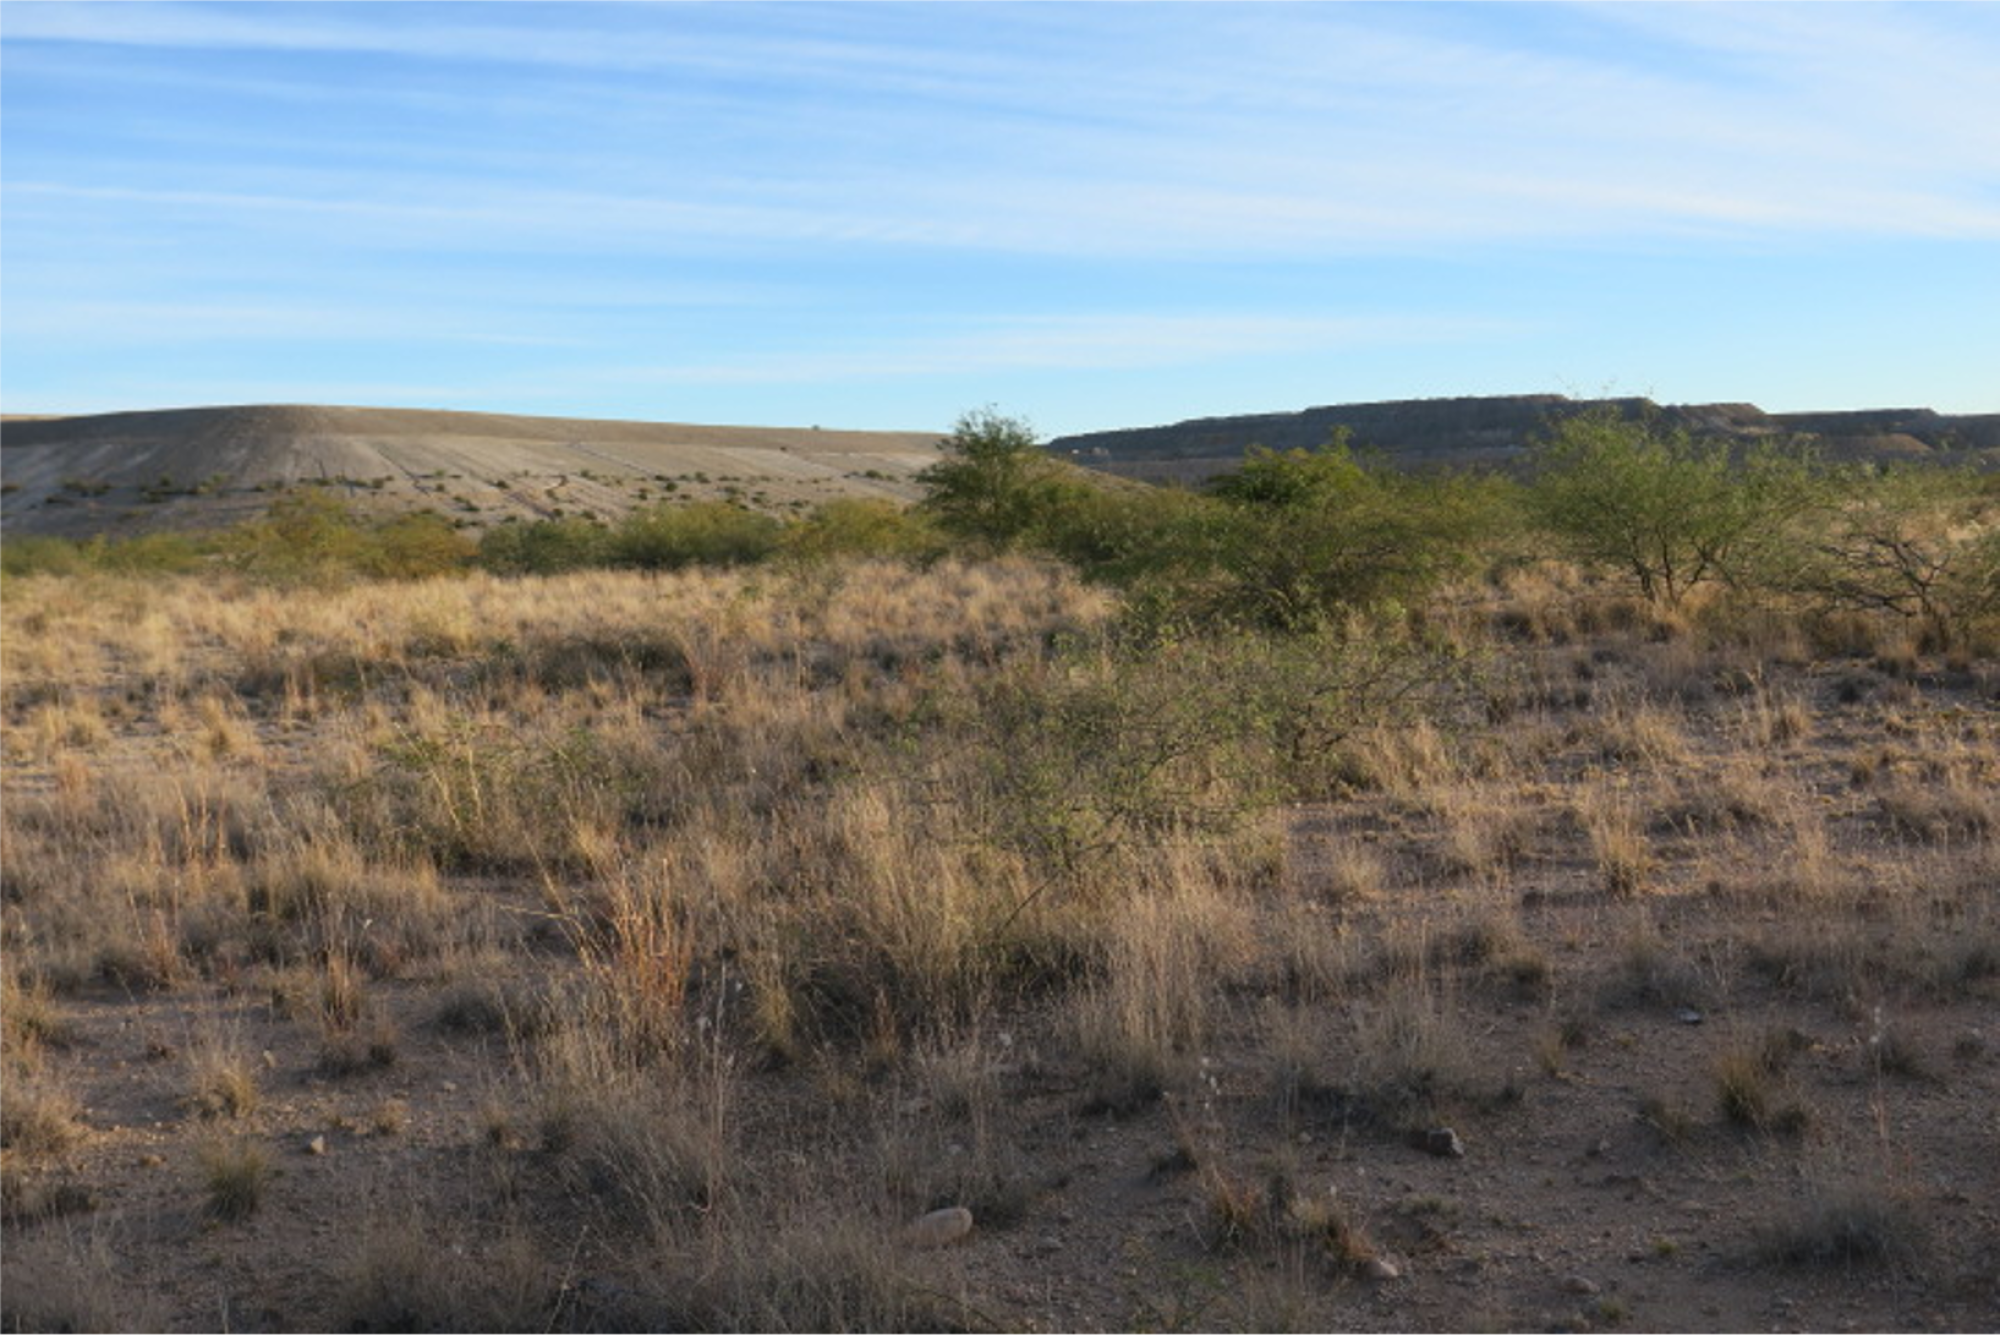 Photo of revegetated tailings facility with grasses and mesquites/acacias.